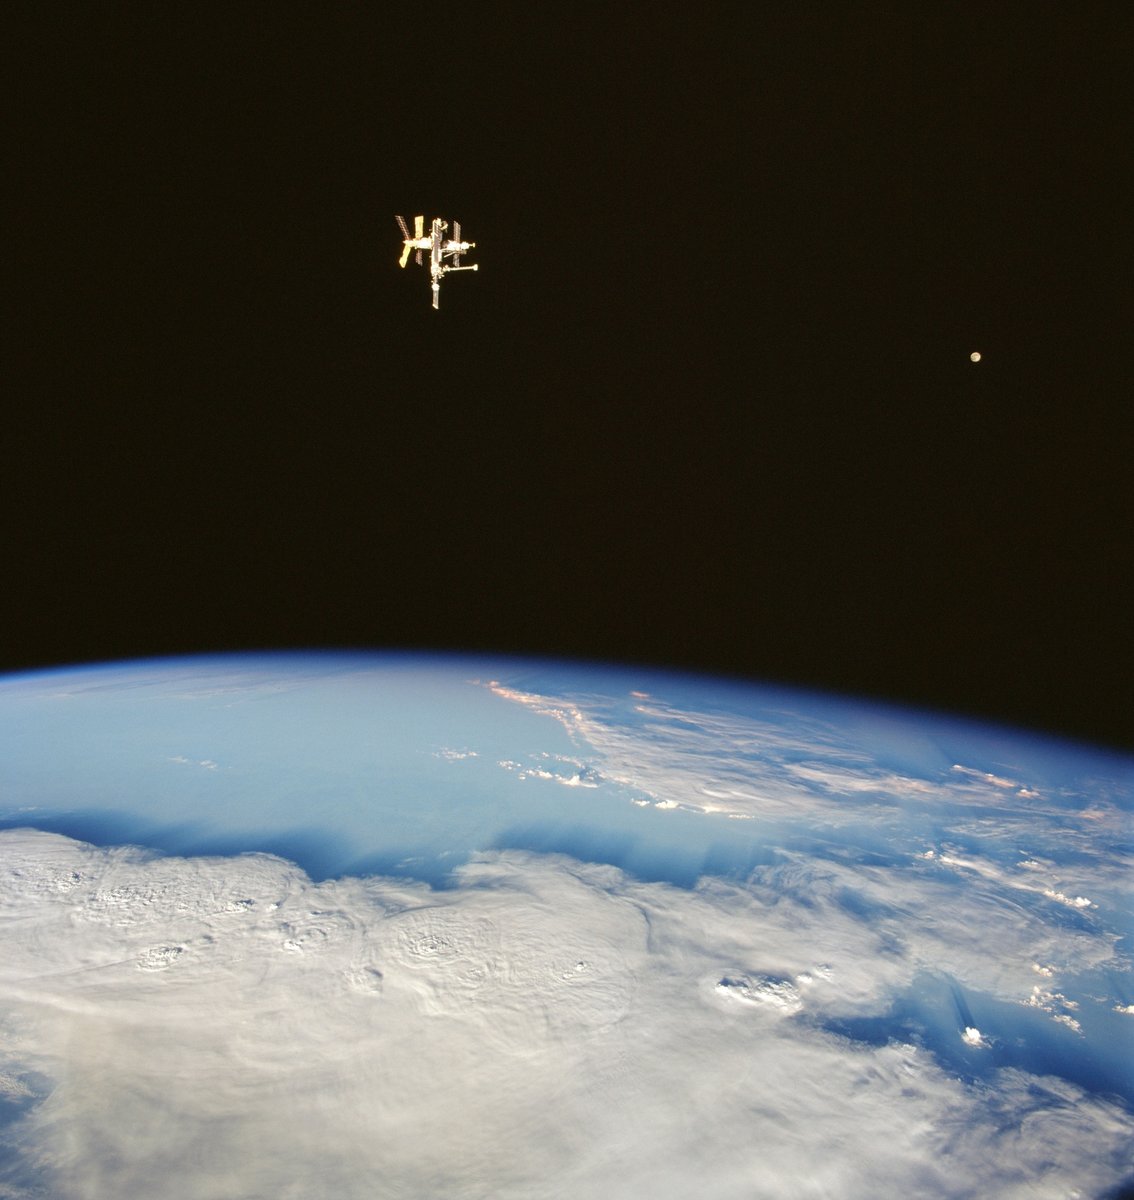 Mir orbital station and the Moon. Photograph from the Space Shuttle Discovery, 1998.